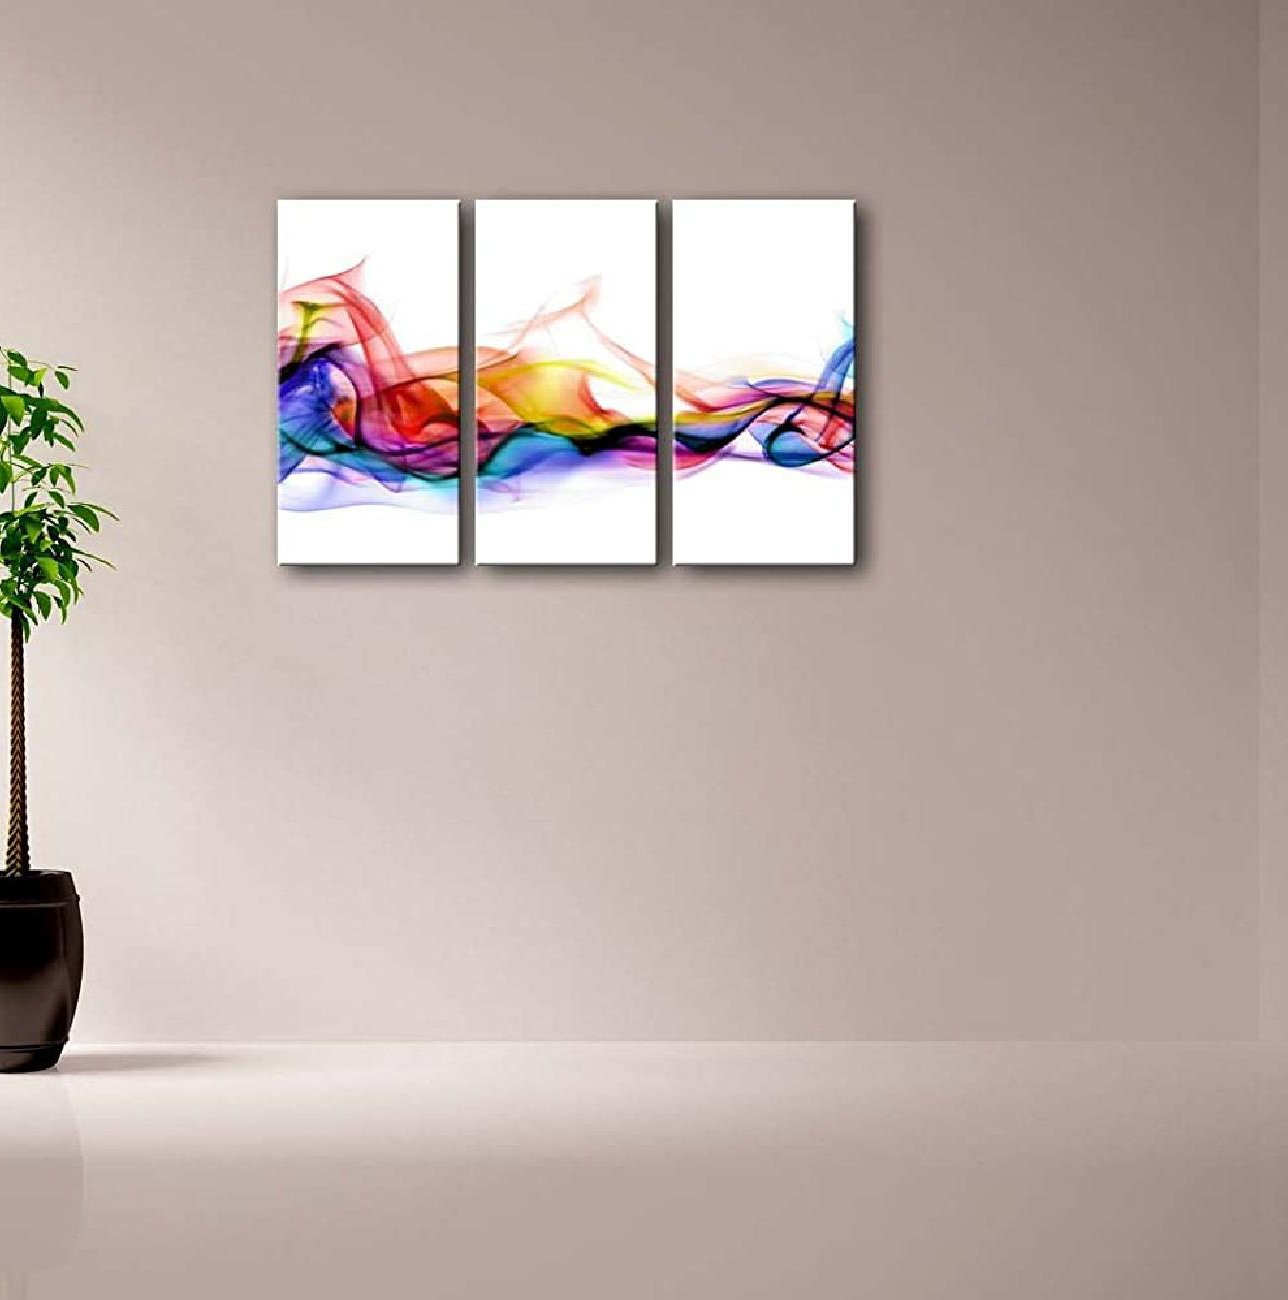 Colourful Modern Art Prints Set of 3 Rainbow Inspired Abstract Wall Art